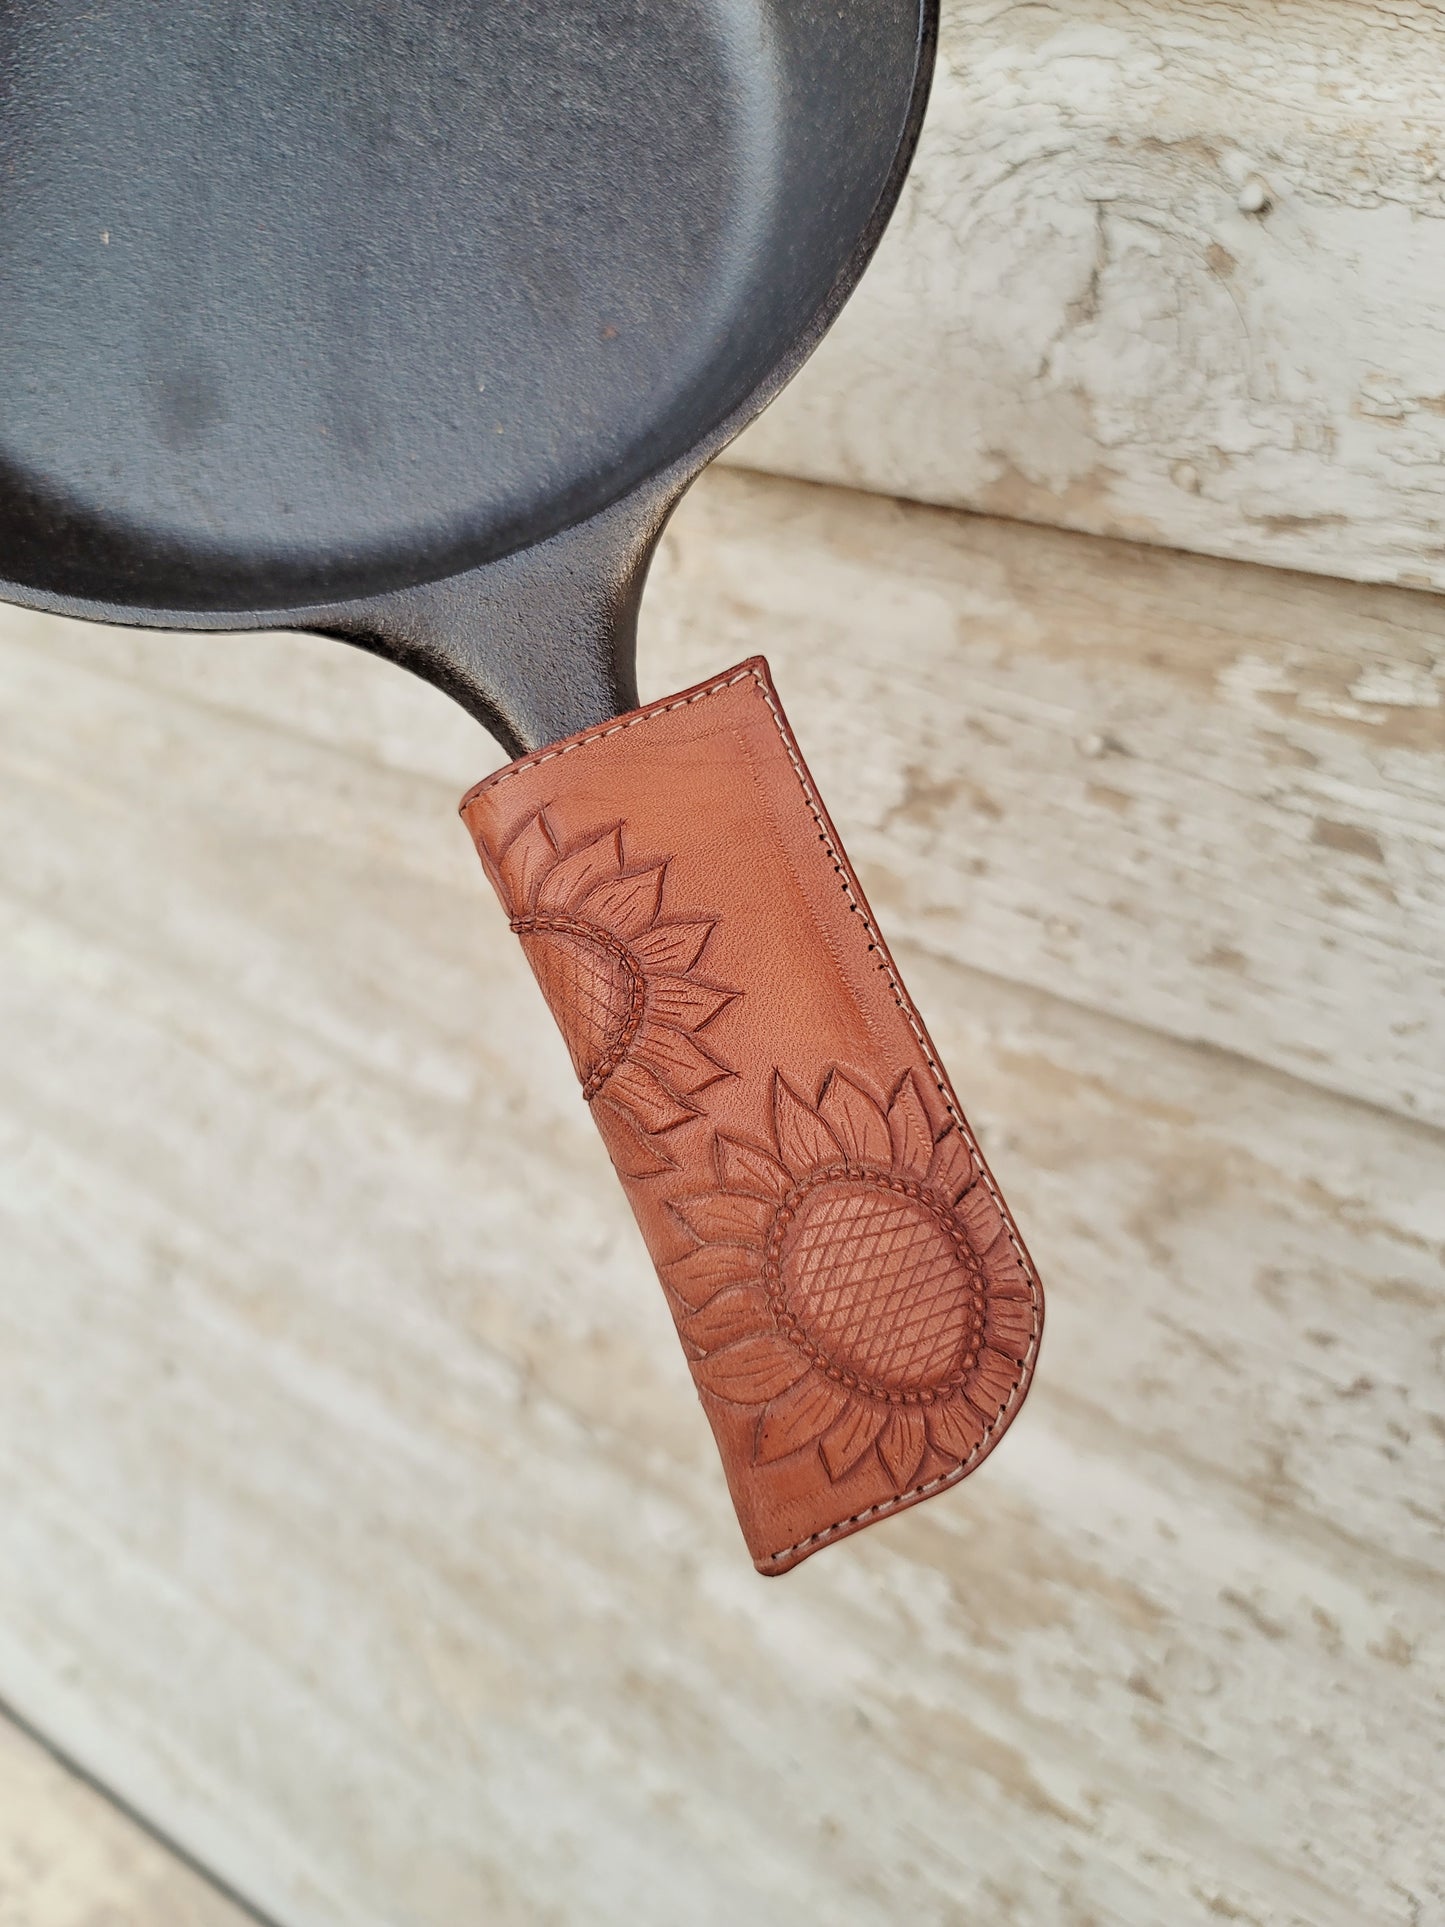 Sunflowers Cast Iron Pan Handle Cover